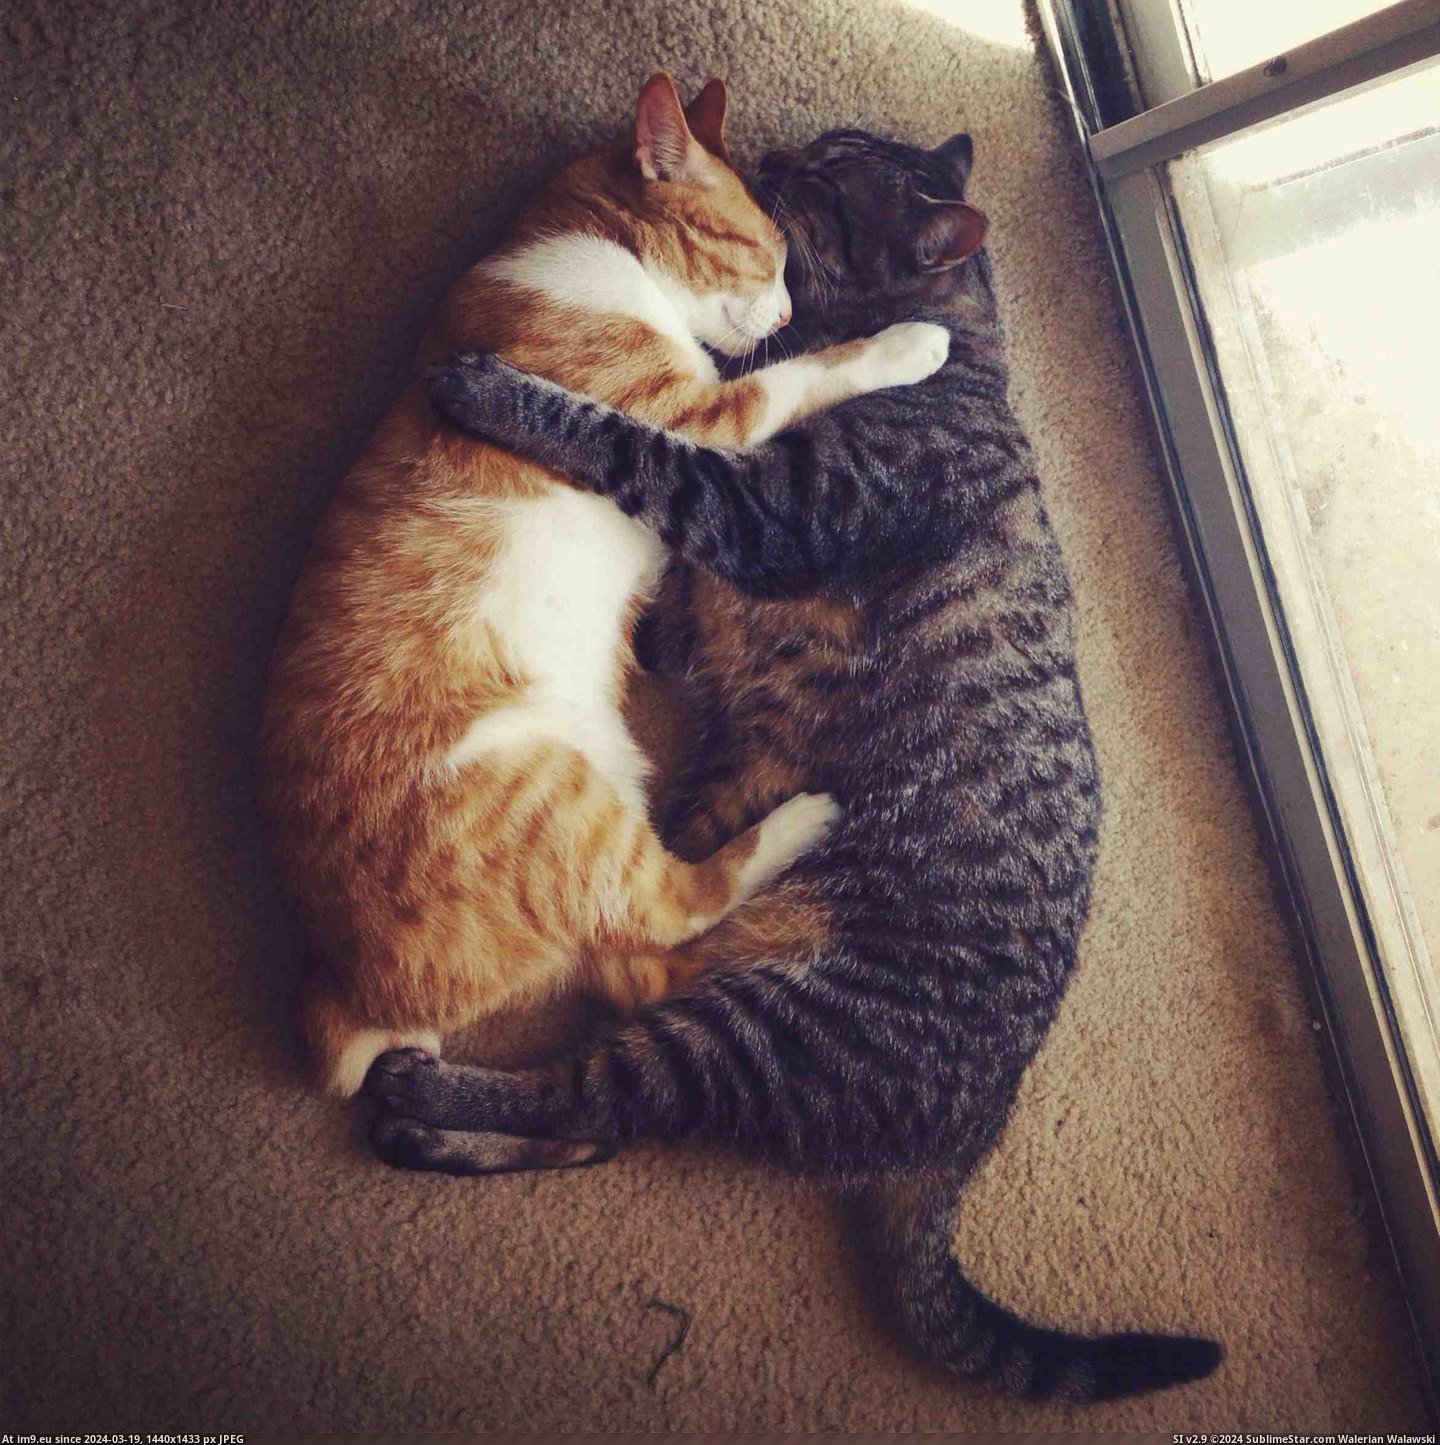 #Cats #Are #Find #Love [Cats] came home to find my cats like this, they are in love Pic. (Изображение из альбом My r/CATS favs))